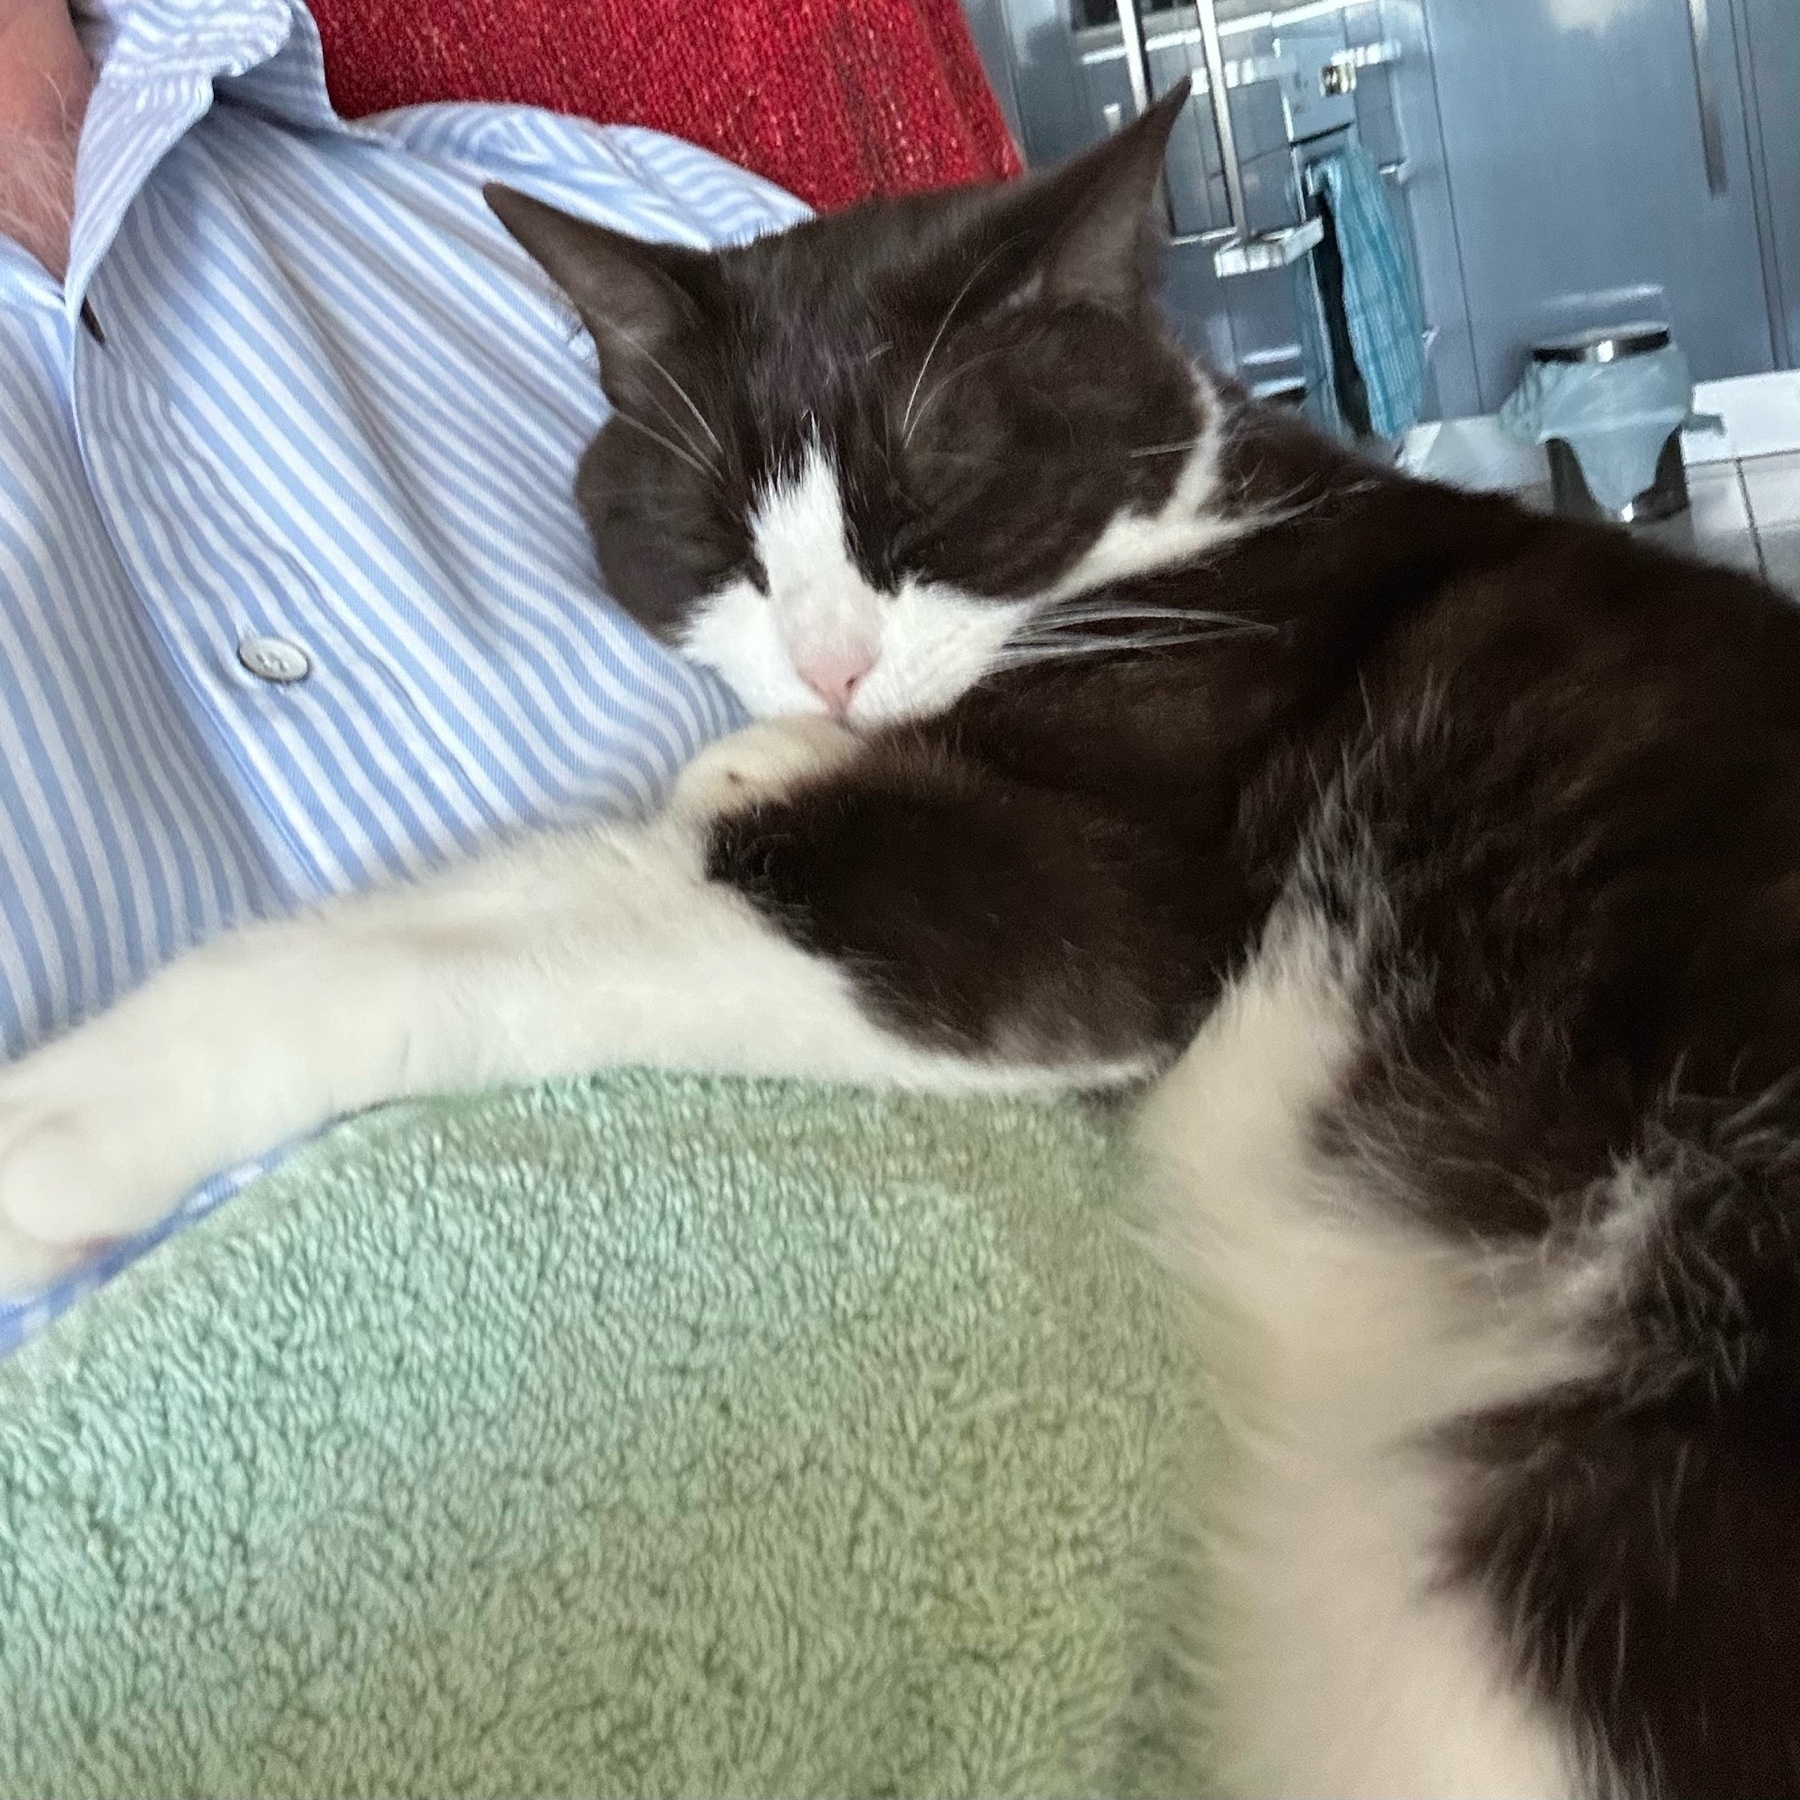 A black and white cat asleep on a man. There is a green towel under the cat and she has one paw stretched out across him.